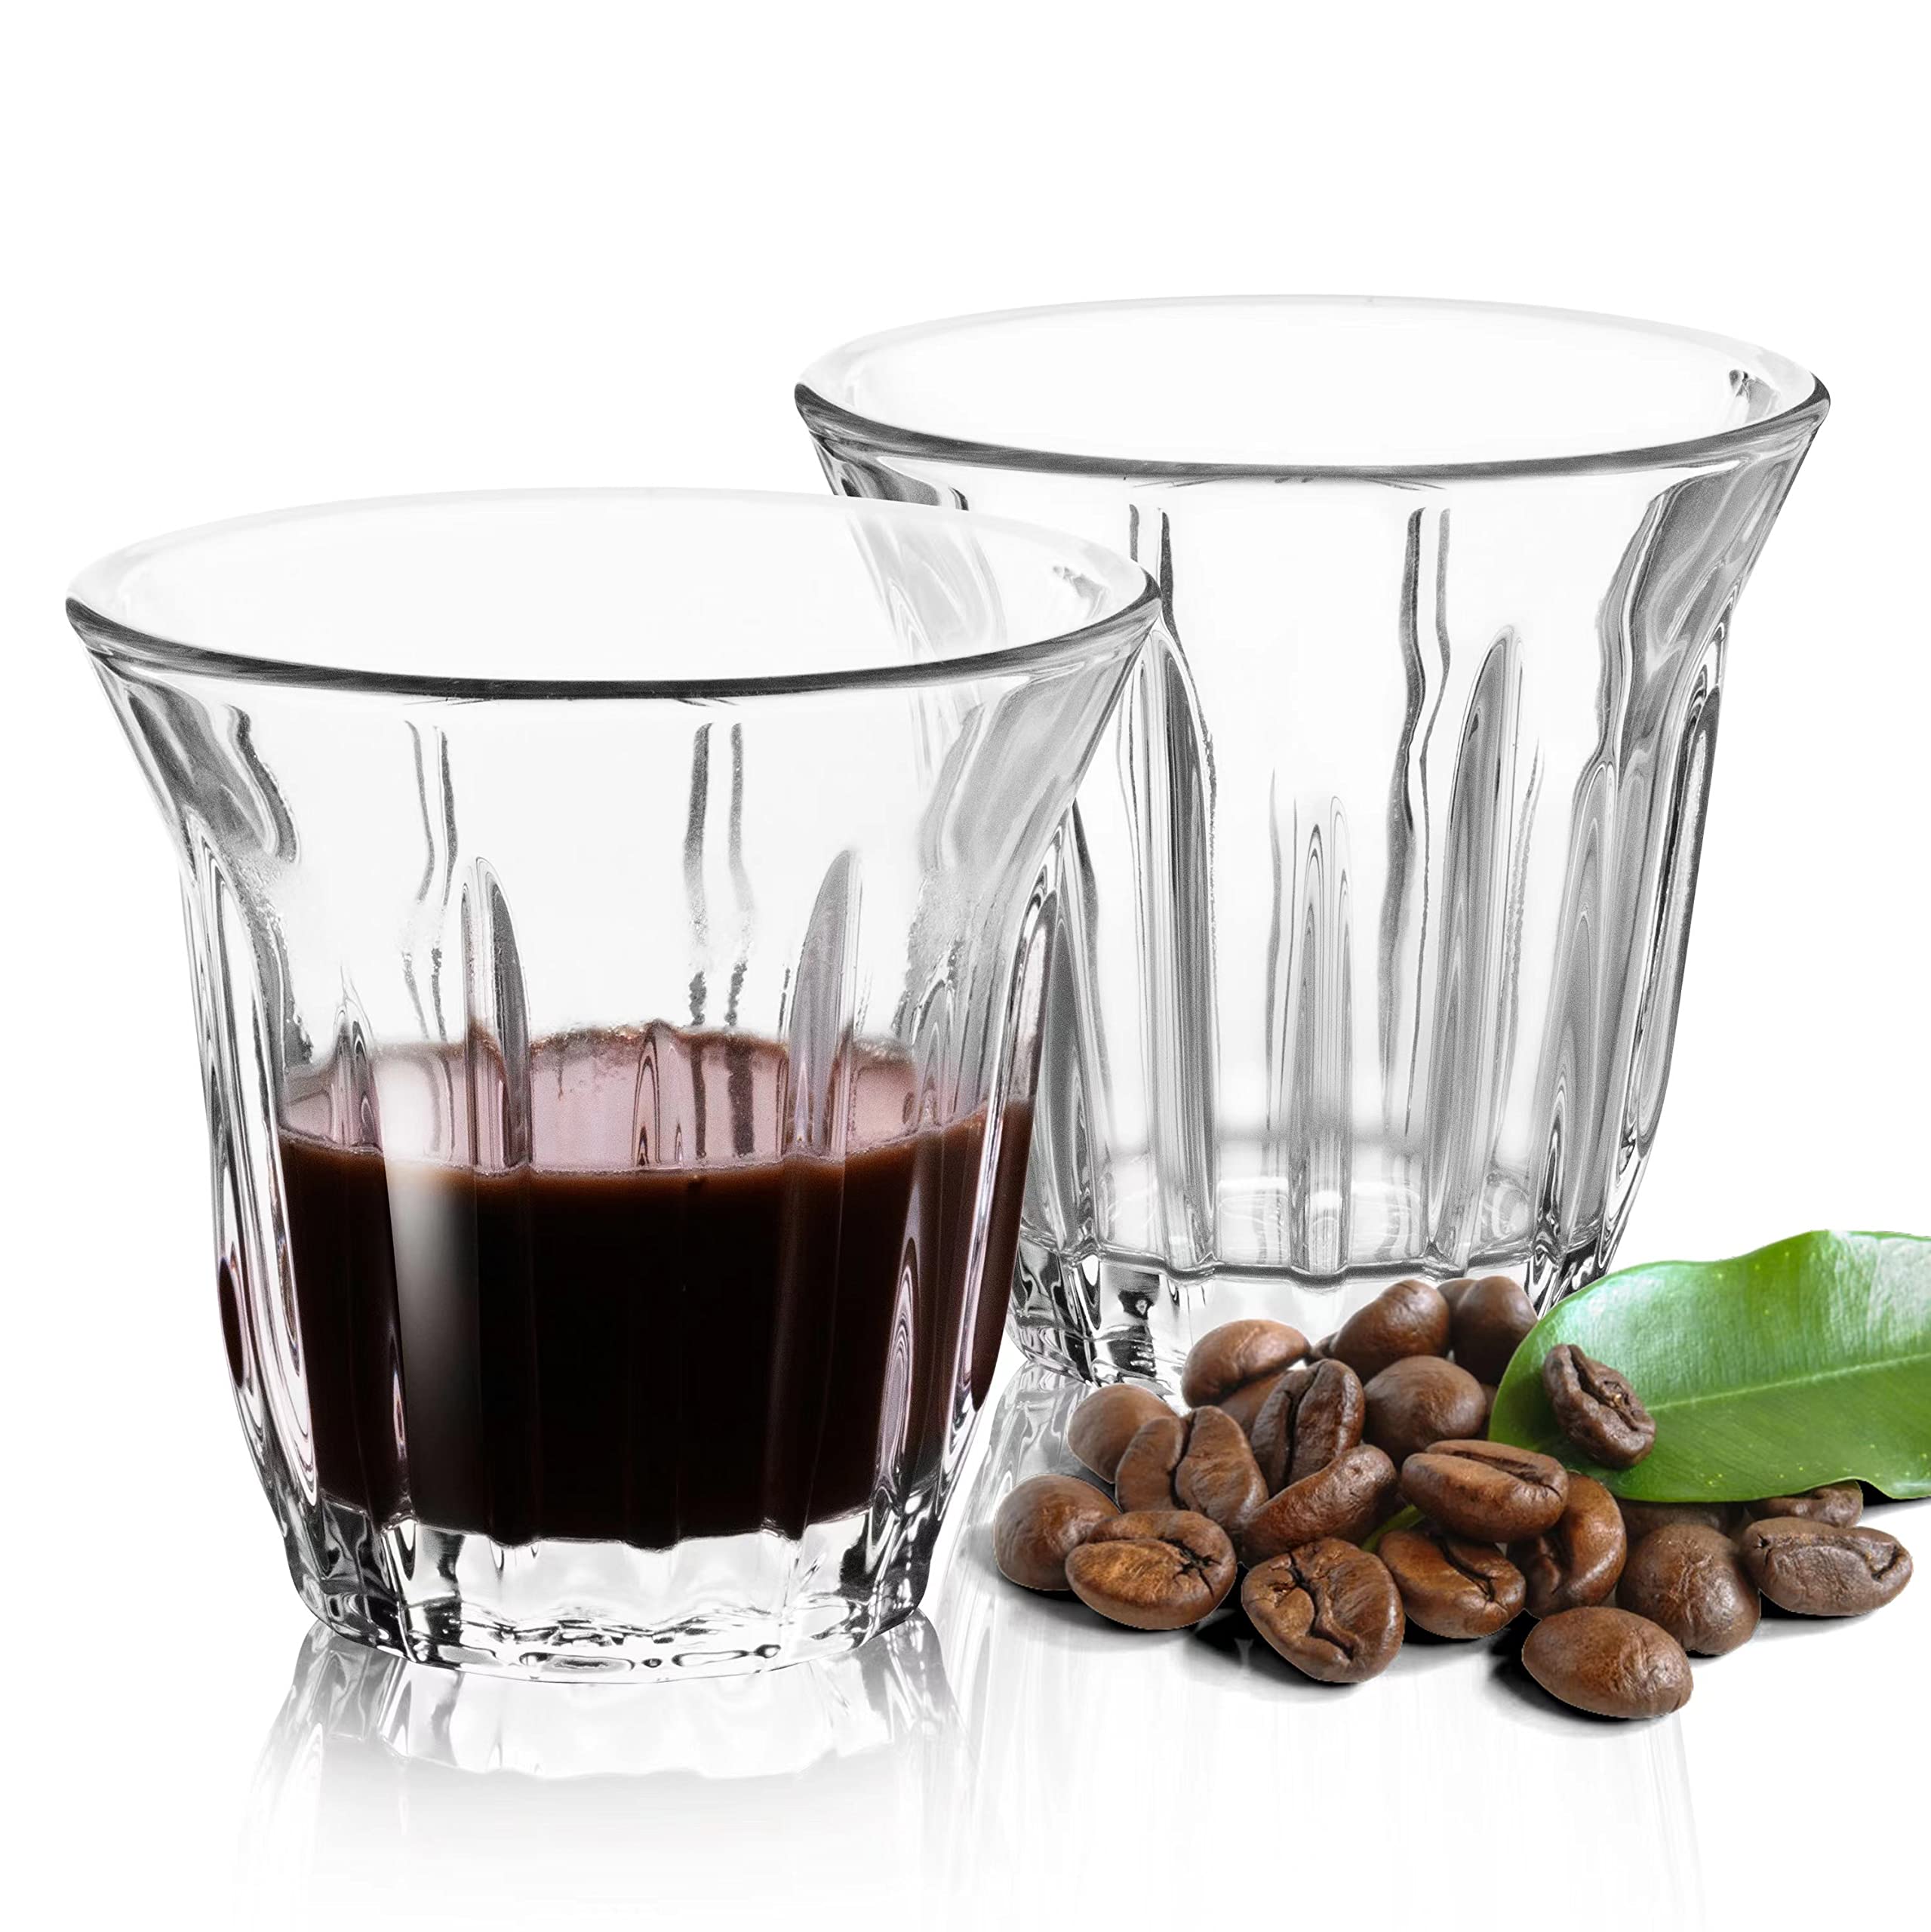 Aijohnny Espresso Cups Set of 2 Clear Glass Cups 3oz for Coffee/Milk, Coffee Mugs Insulated Shot Glasses Regular Espresso Accessories in Kitchen/Office/Bar, Easy to Clean (3oz-2 Pack)